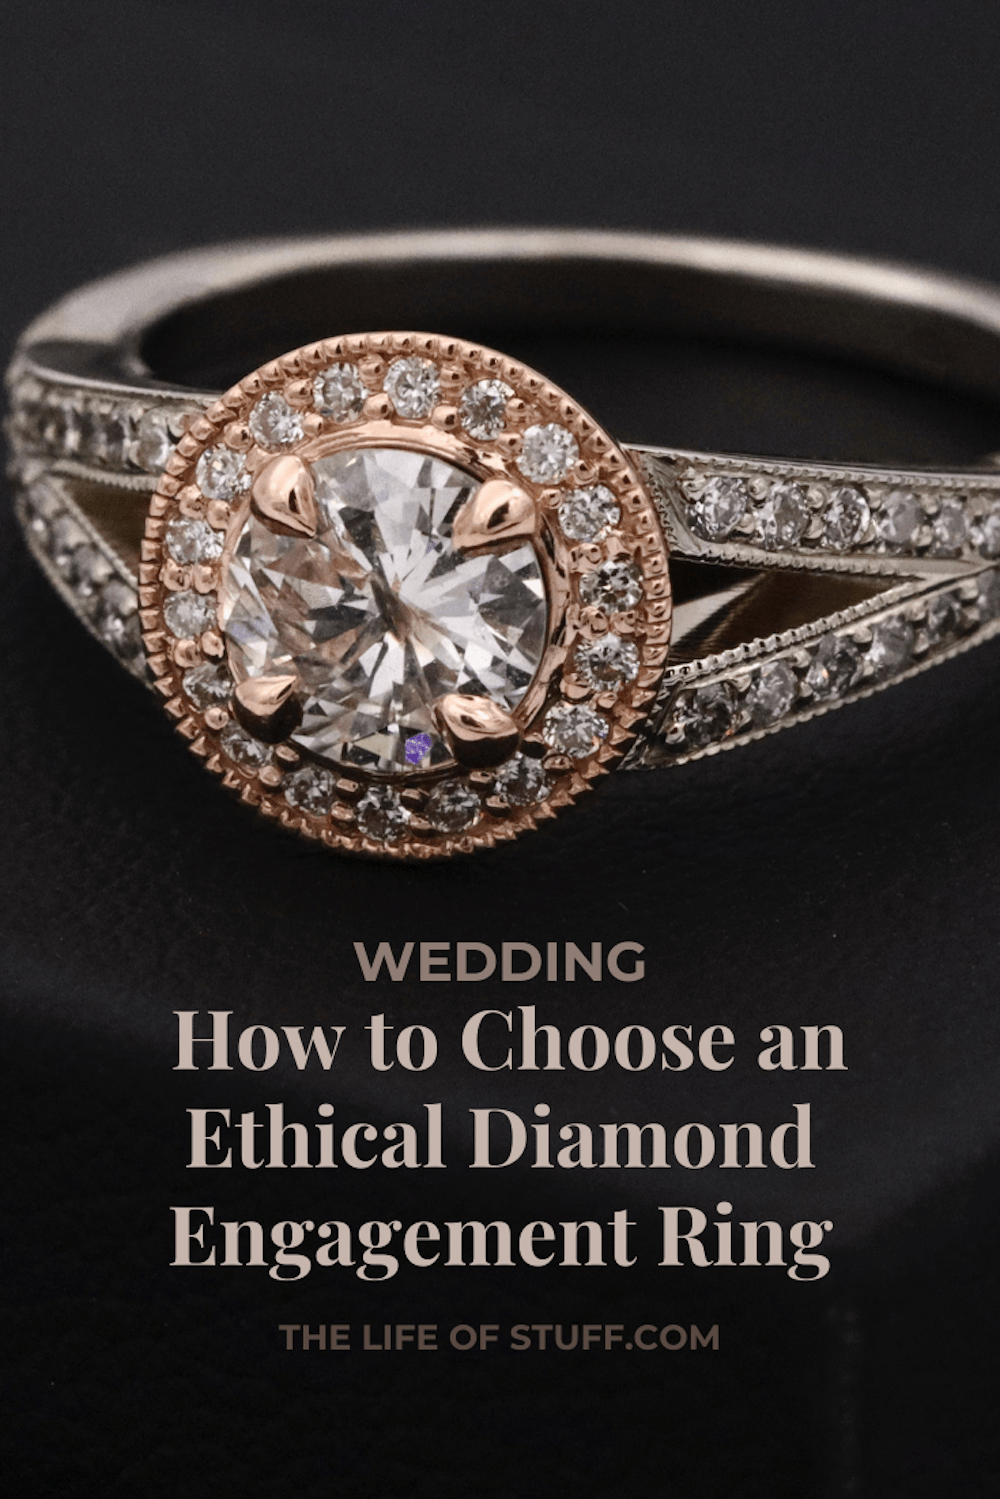 How to Choose an Ethical Diamond Engagement Ring - The Life of Stuff